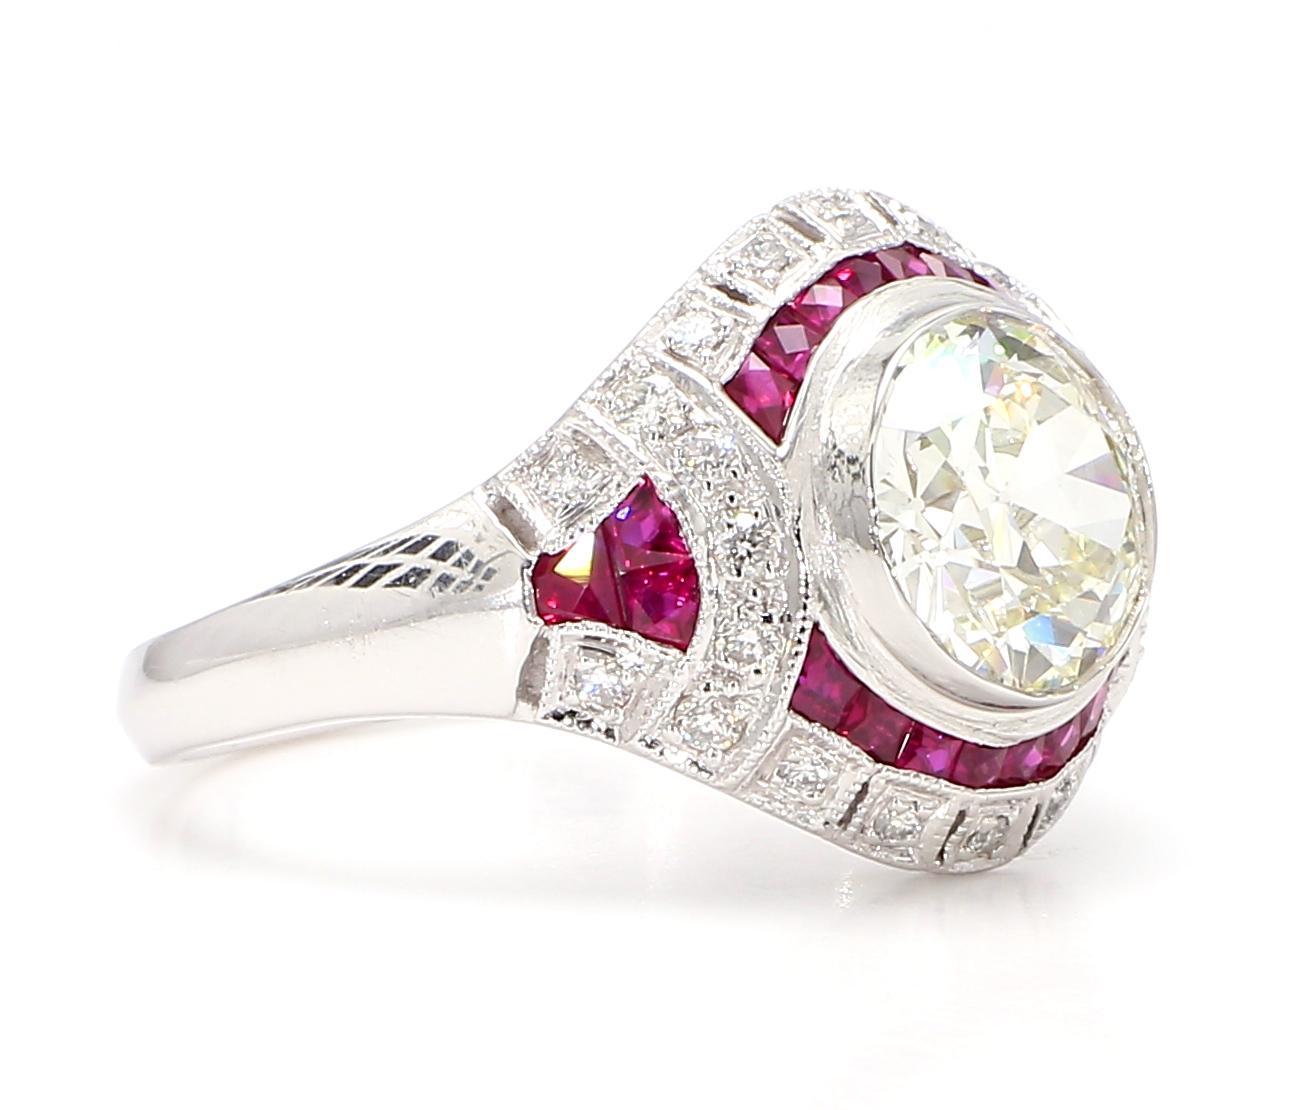 GIA Certified 2.56 Carat Diamond and 1.15 Carat Ruby Art Deco Platinum Ring In Good Condition For Sale In New York, NY